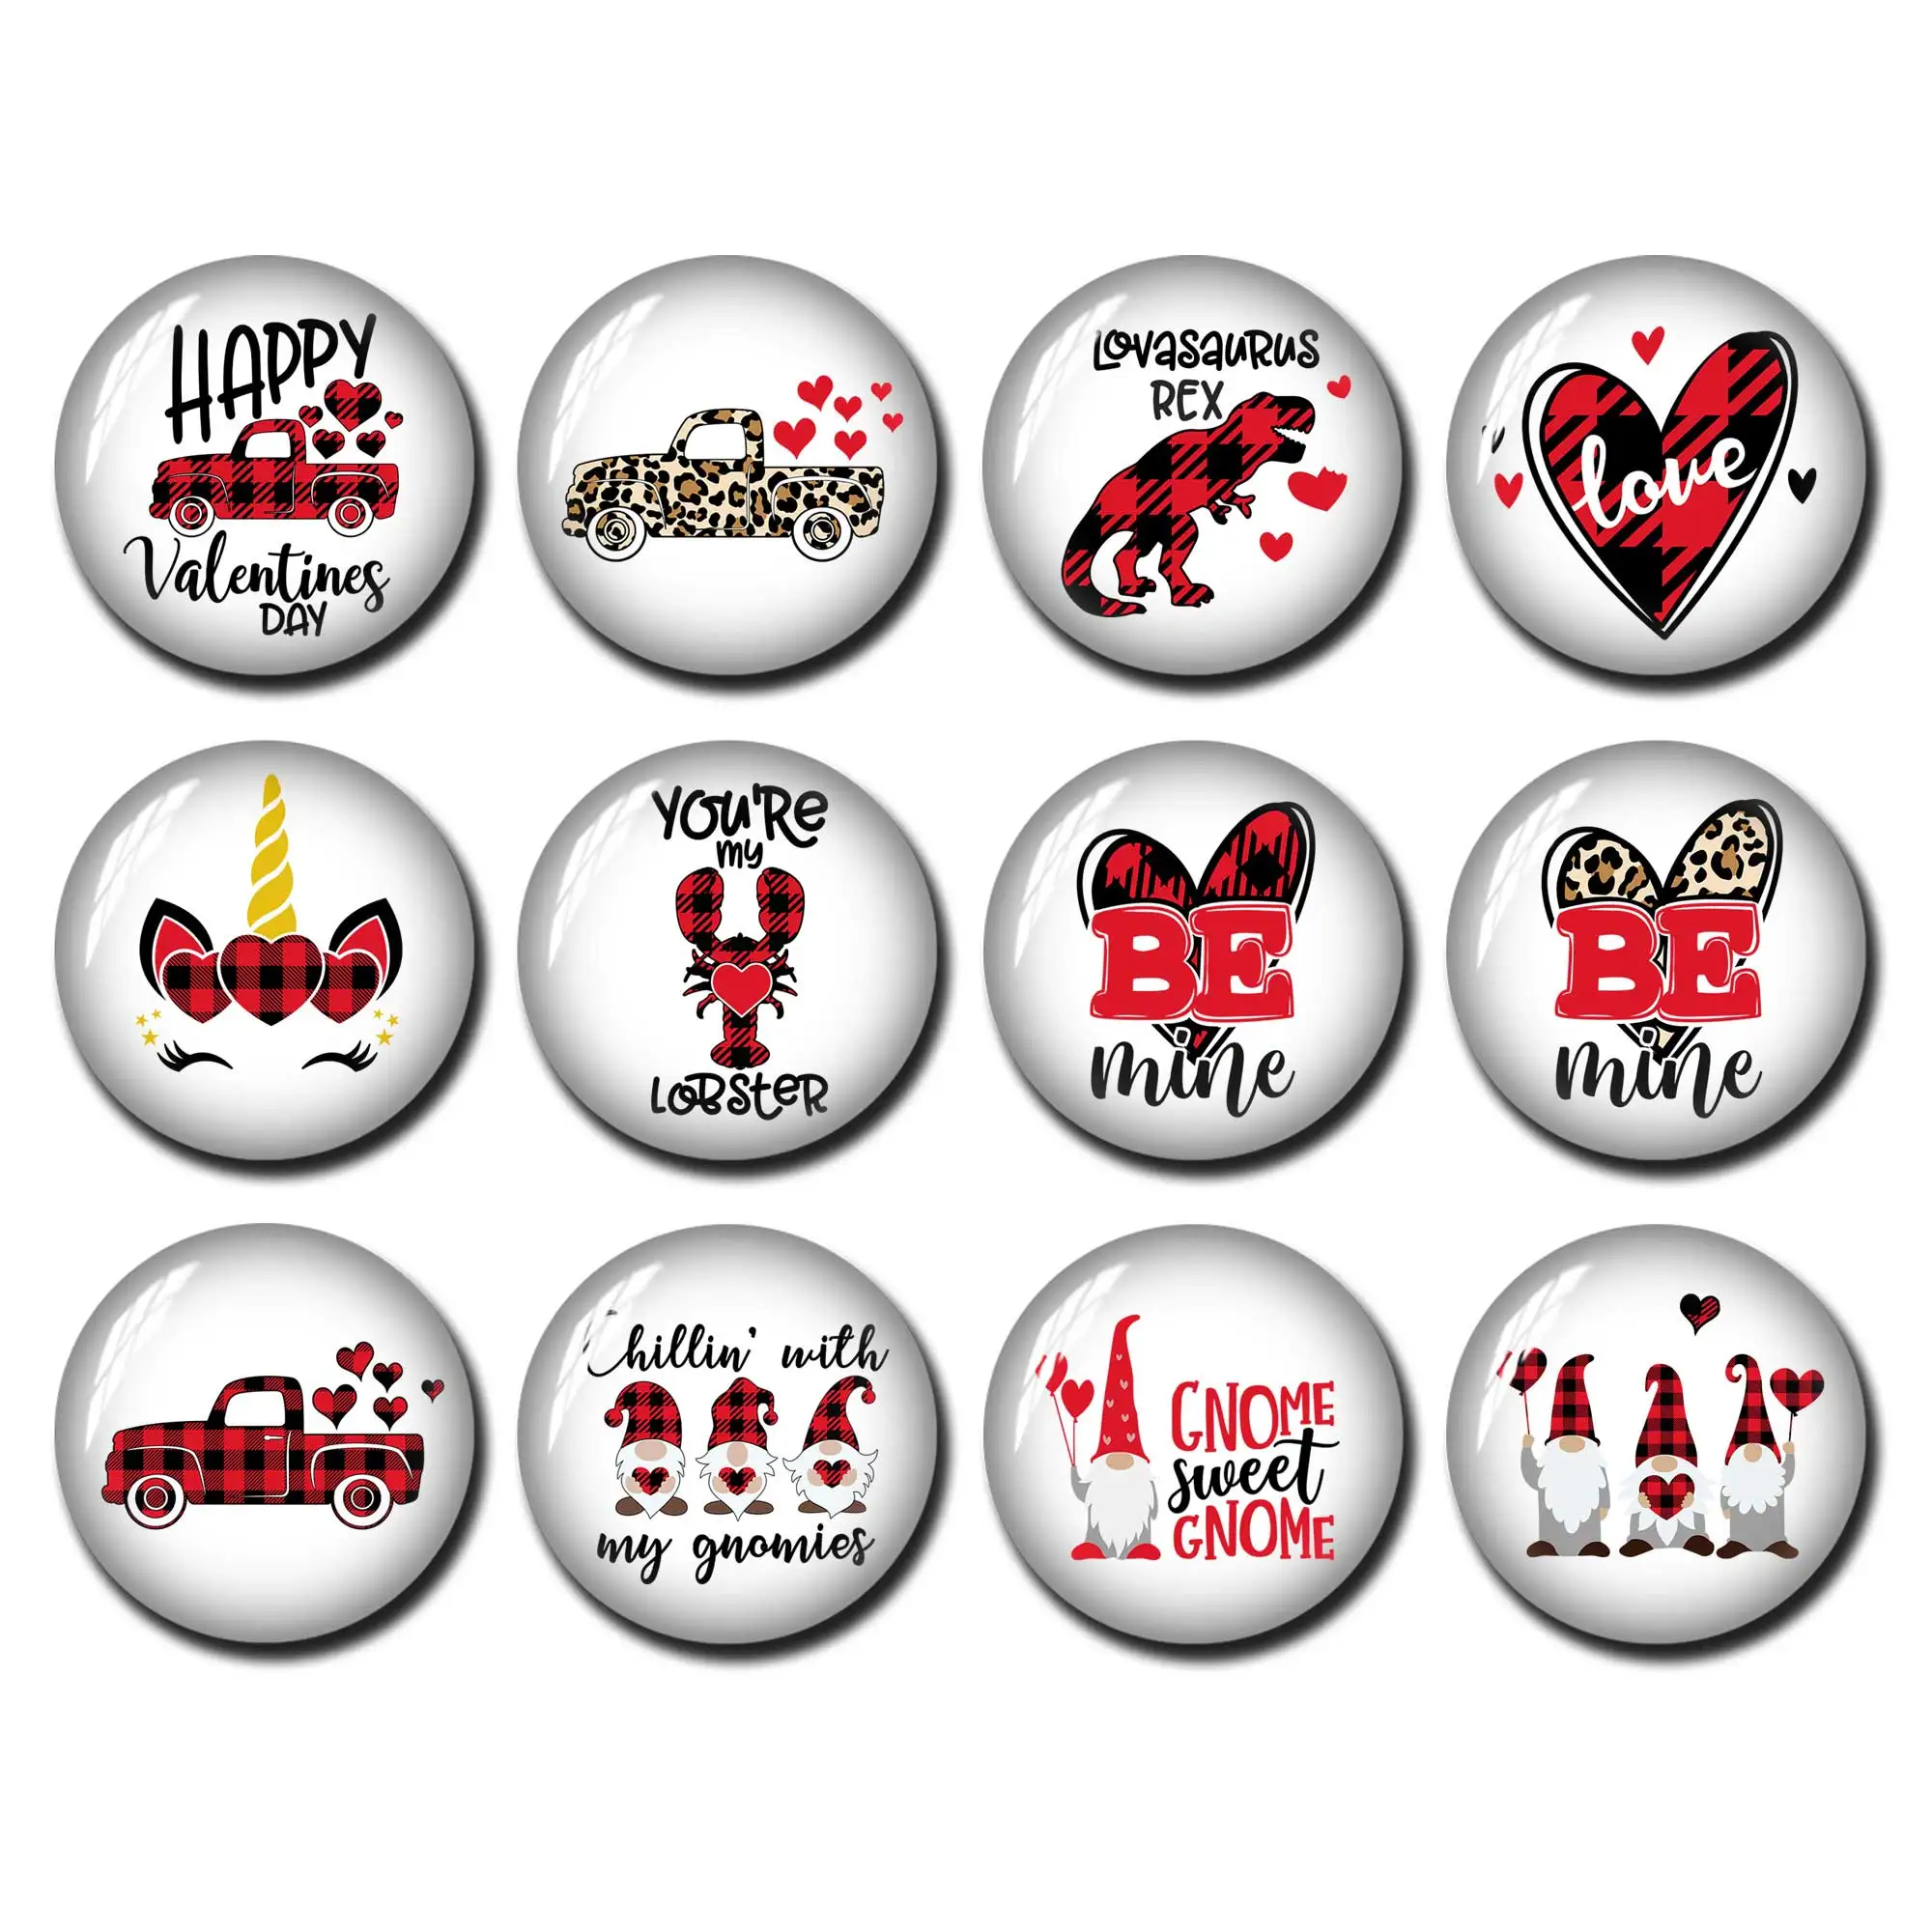 

Valentine's Day Cabochon, love heart Kiss Lips image Glass dome,12mm 16mm 20mm 25mm 30mm 40mm Picture Beads - FJ1436